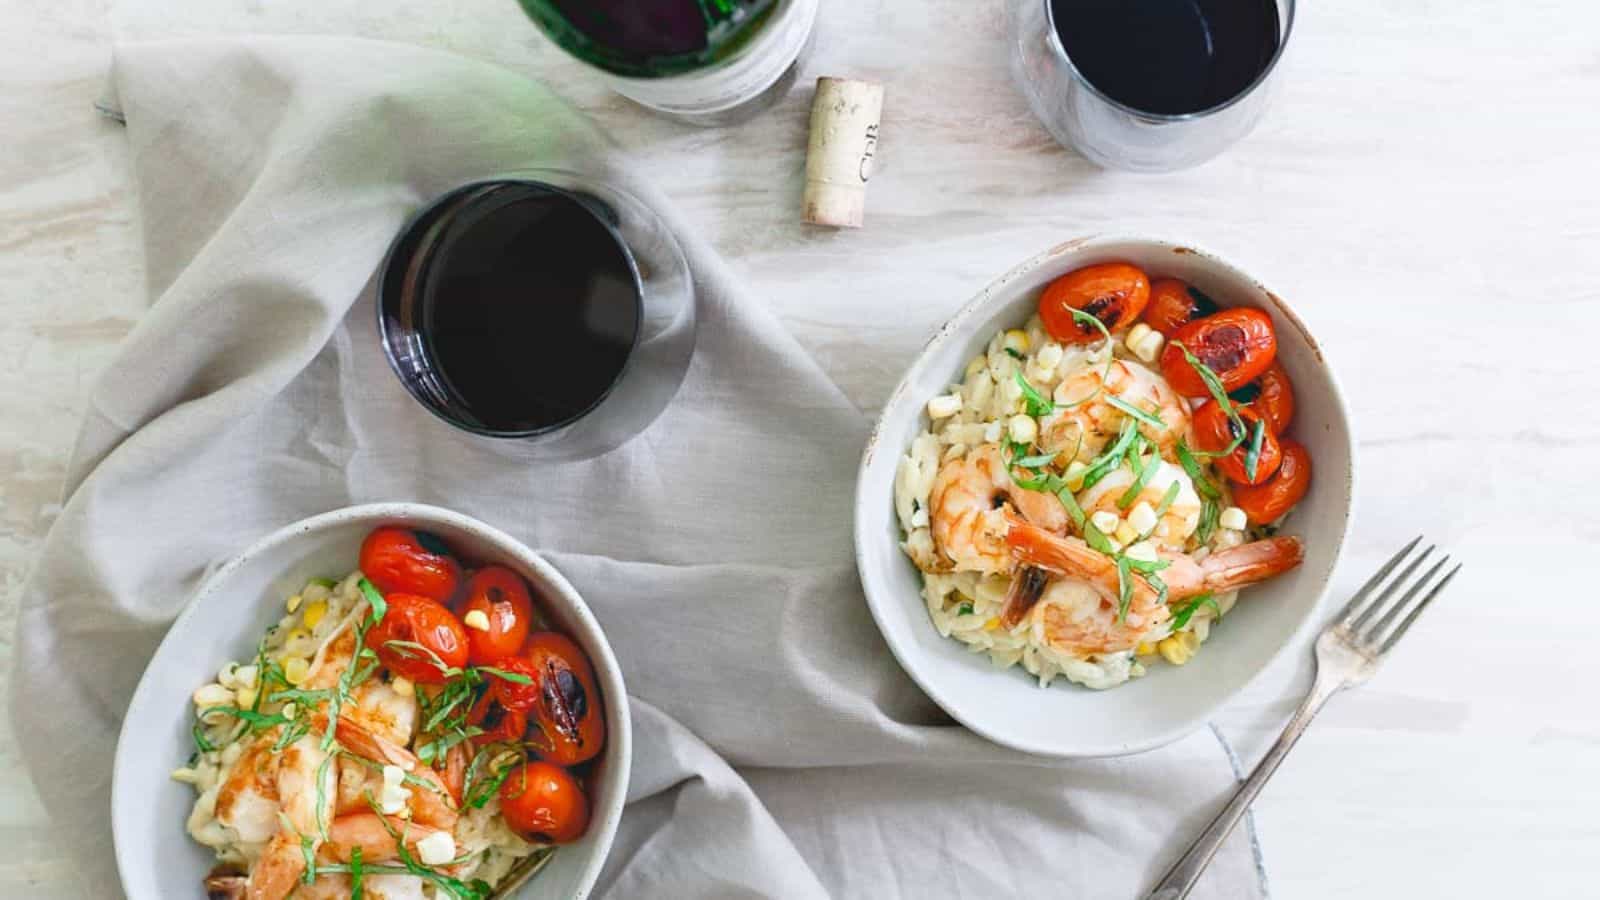 Overhead view of two bowls of brown butter shrimp with parmesan basil corn orzo, with two glasses of wine and a wine bottle in the background.